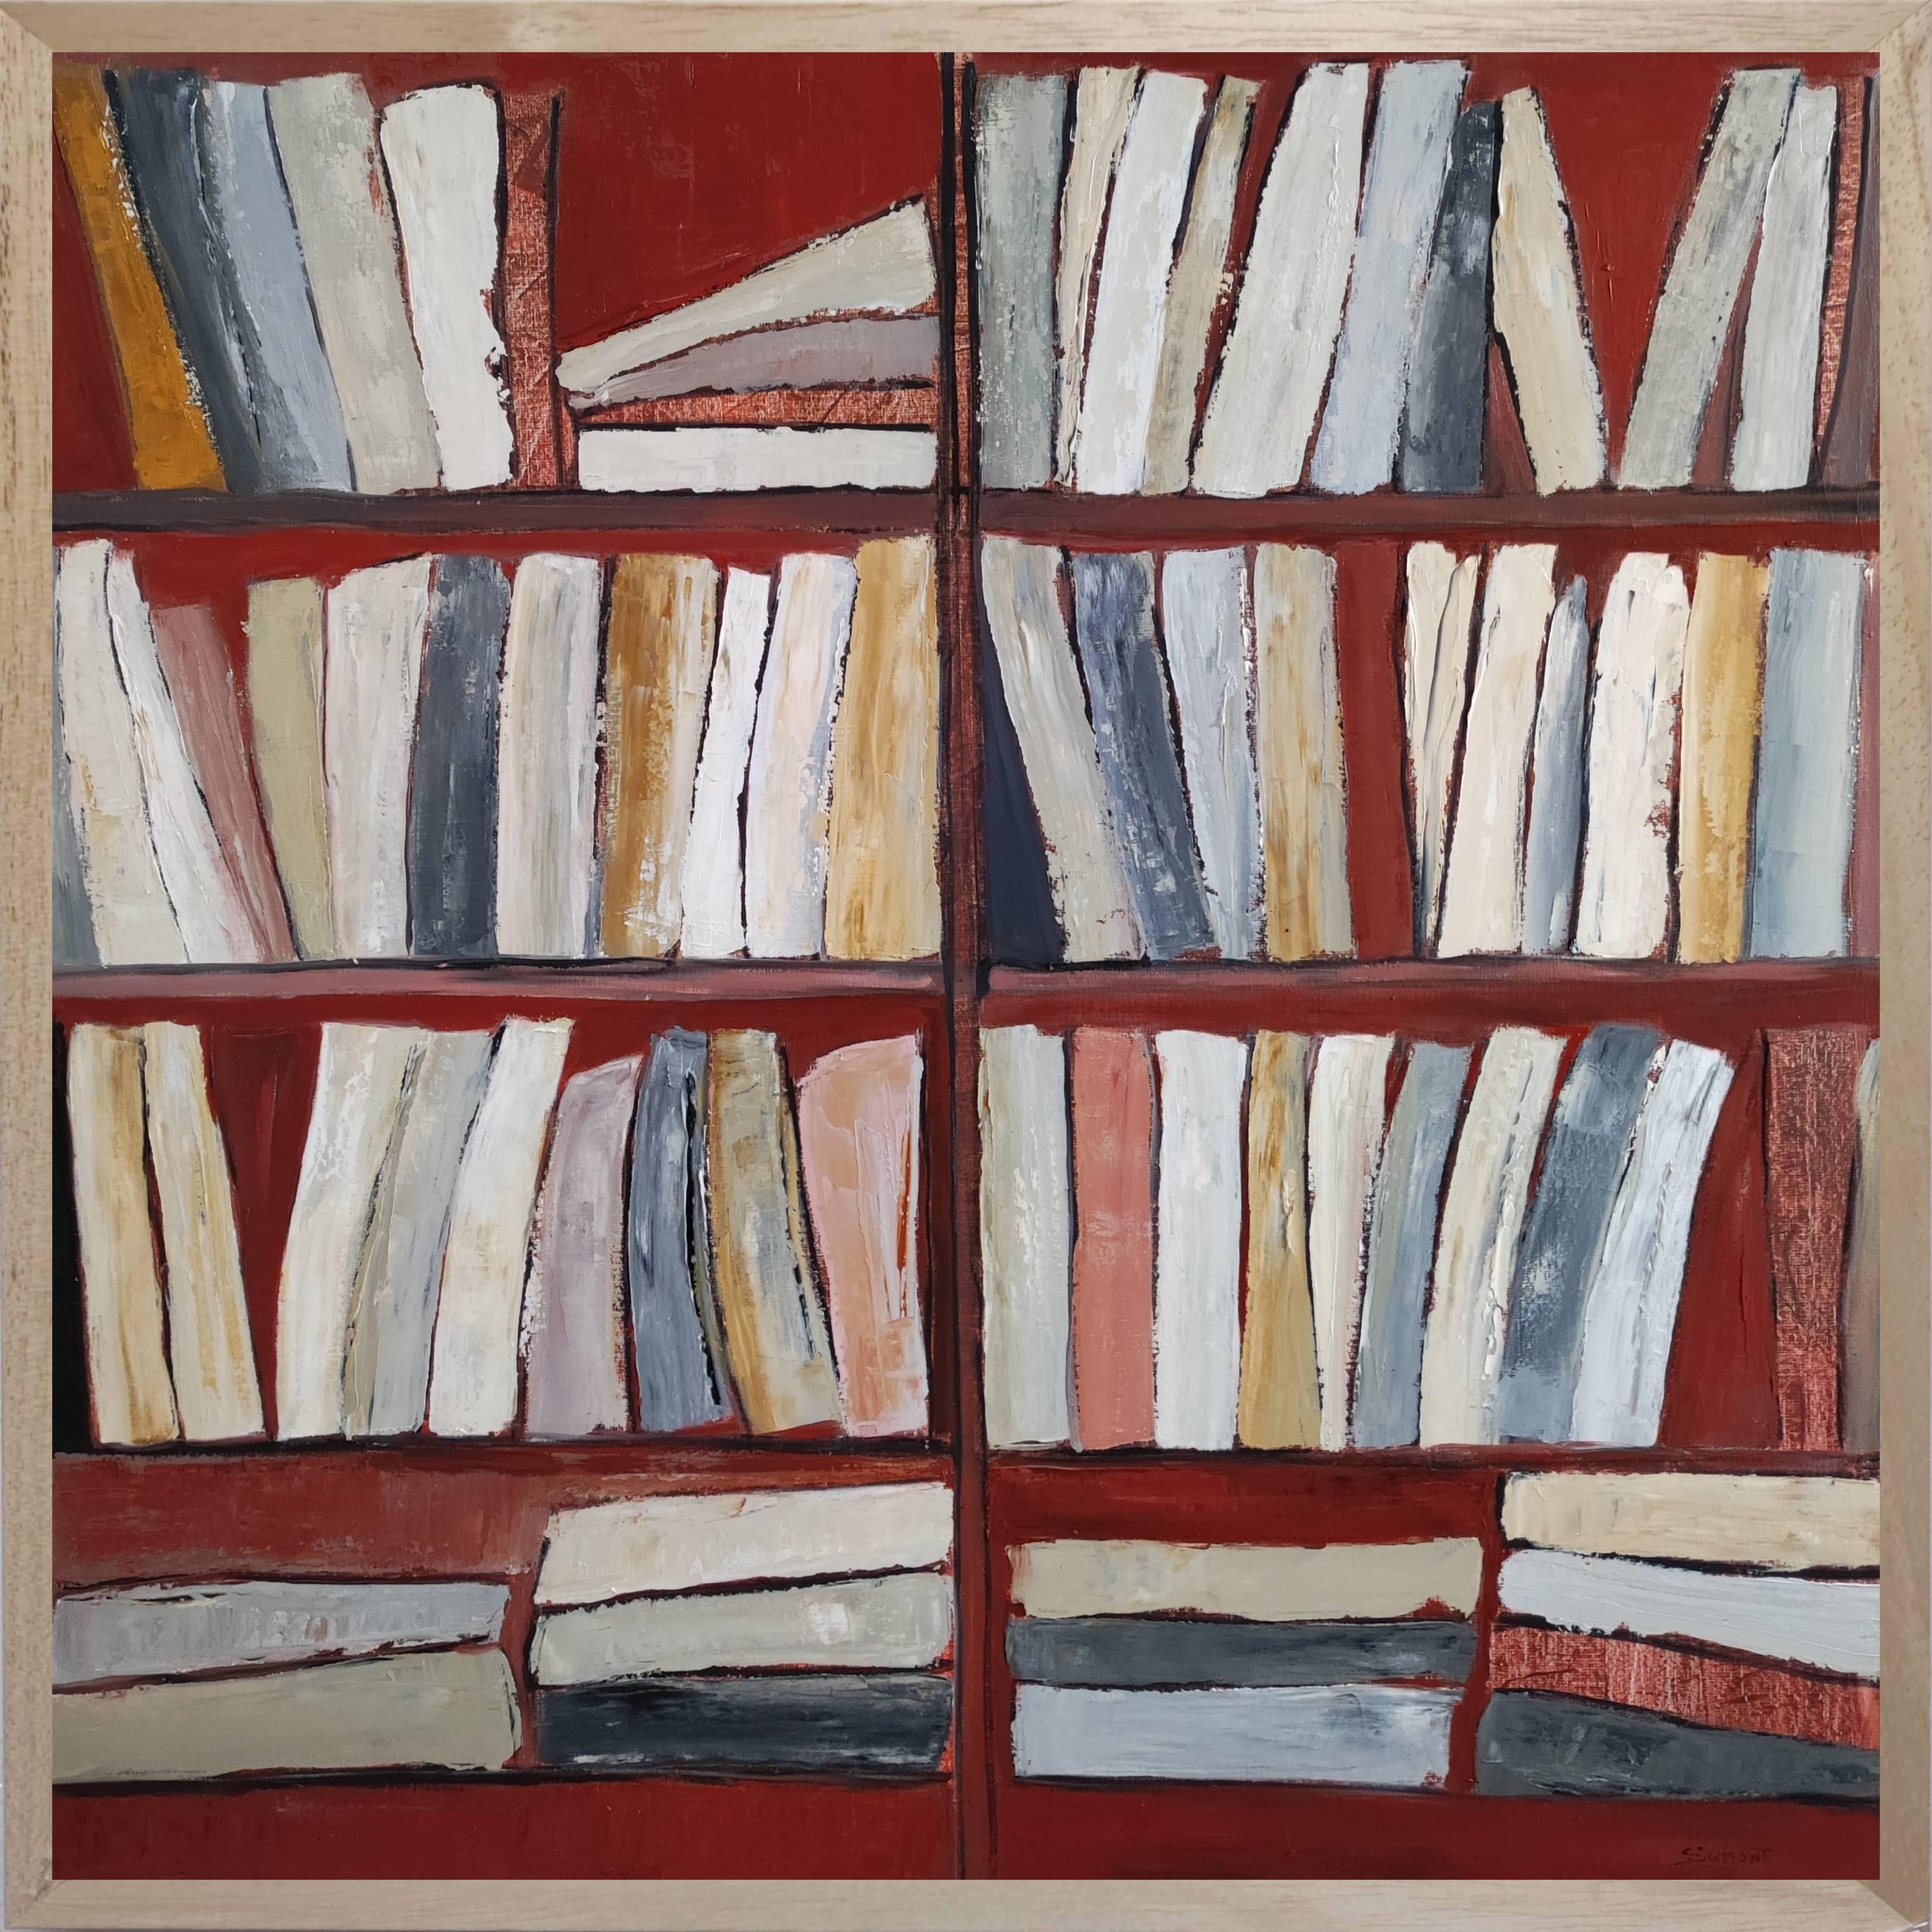 SOPHIE DUMONT Interior Painting - Tecke, abstract, minimalism, library series, oil on canvas, textured, books, red